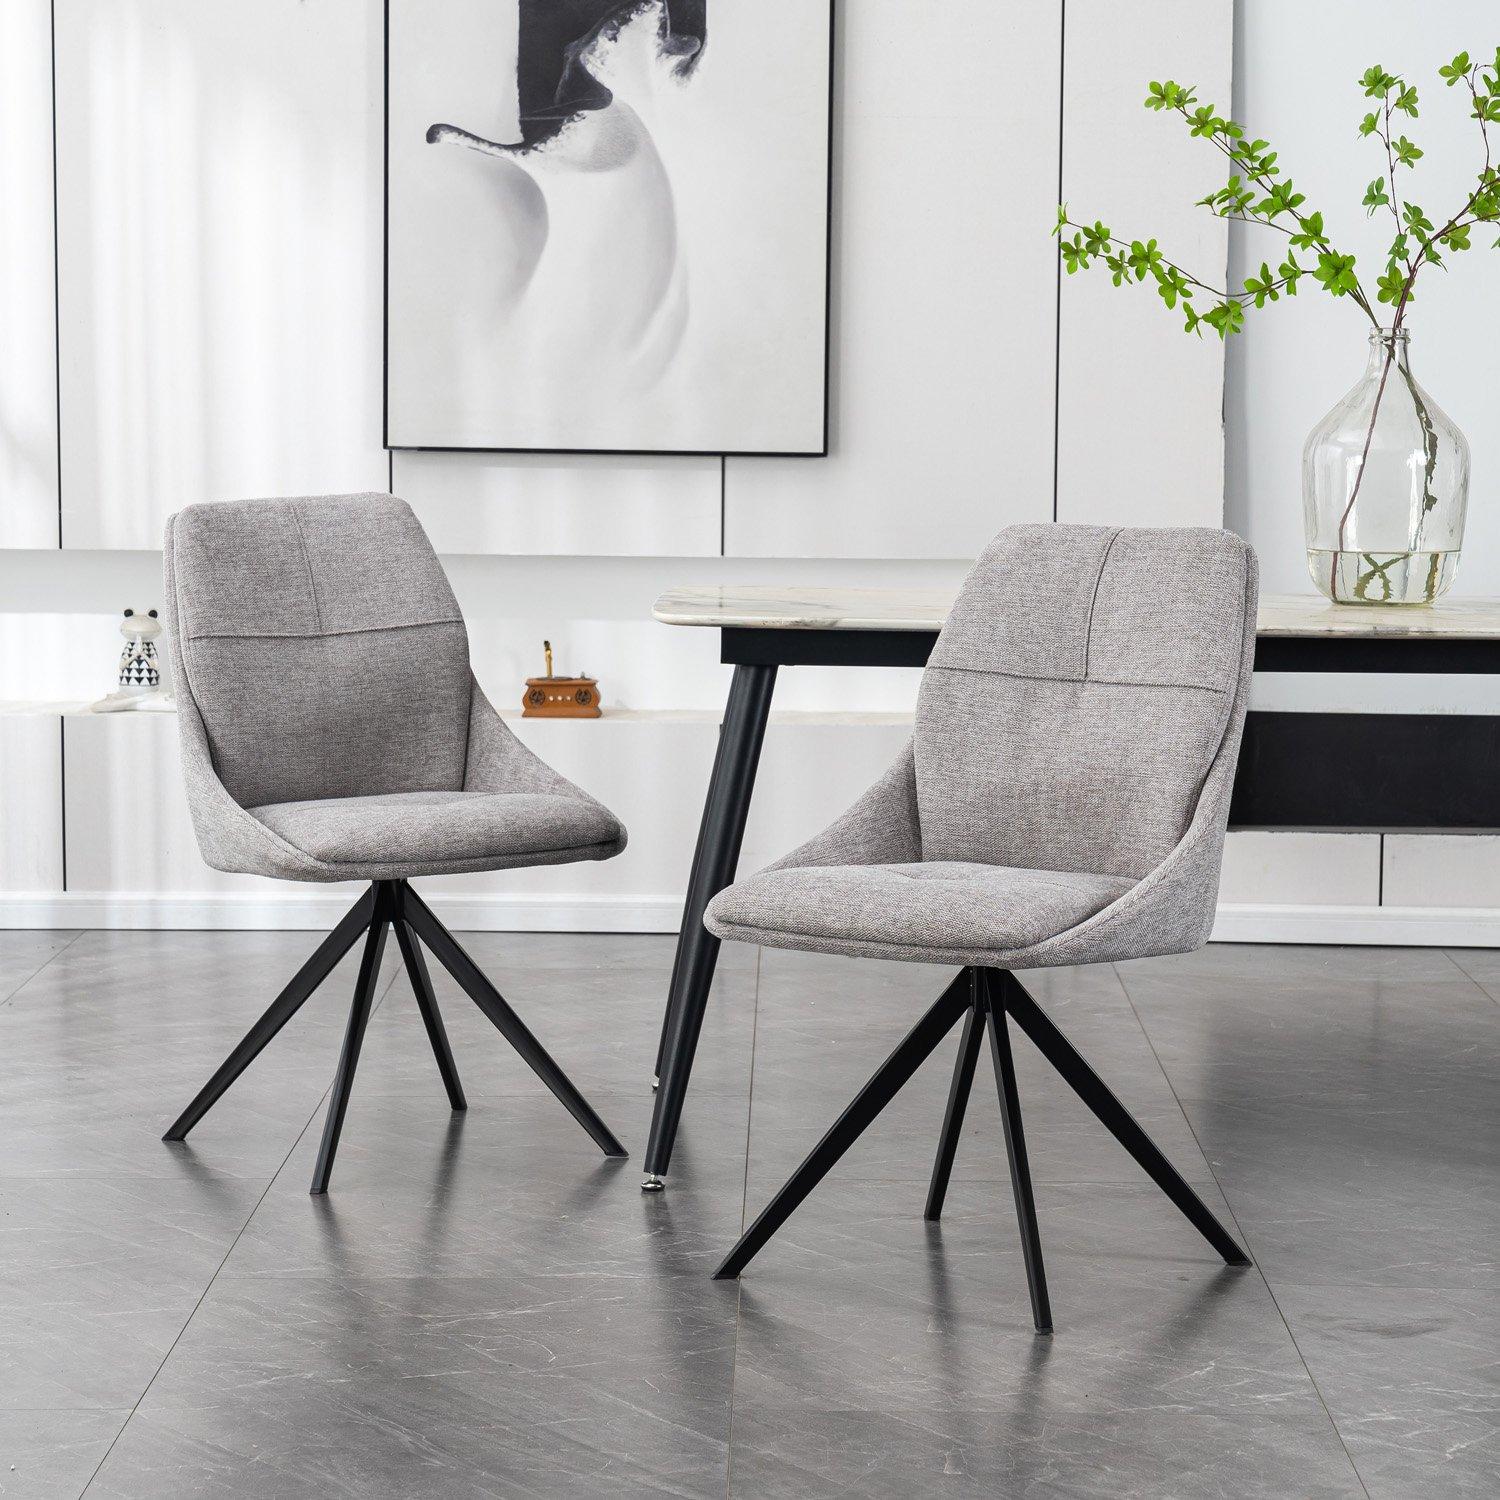 Set of 8 Luna Modern Fabric Dining Chair Padded Seat w Arms Metal Legs